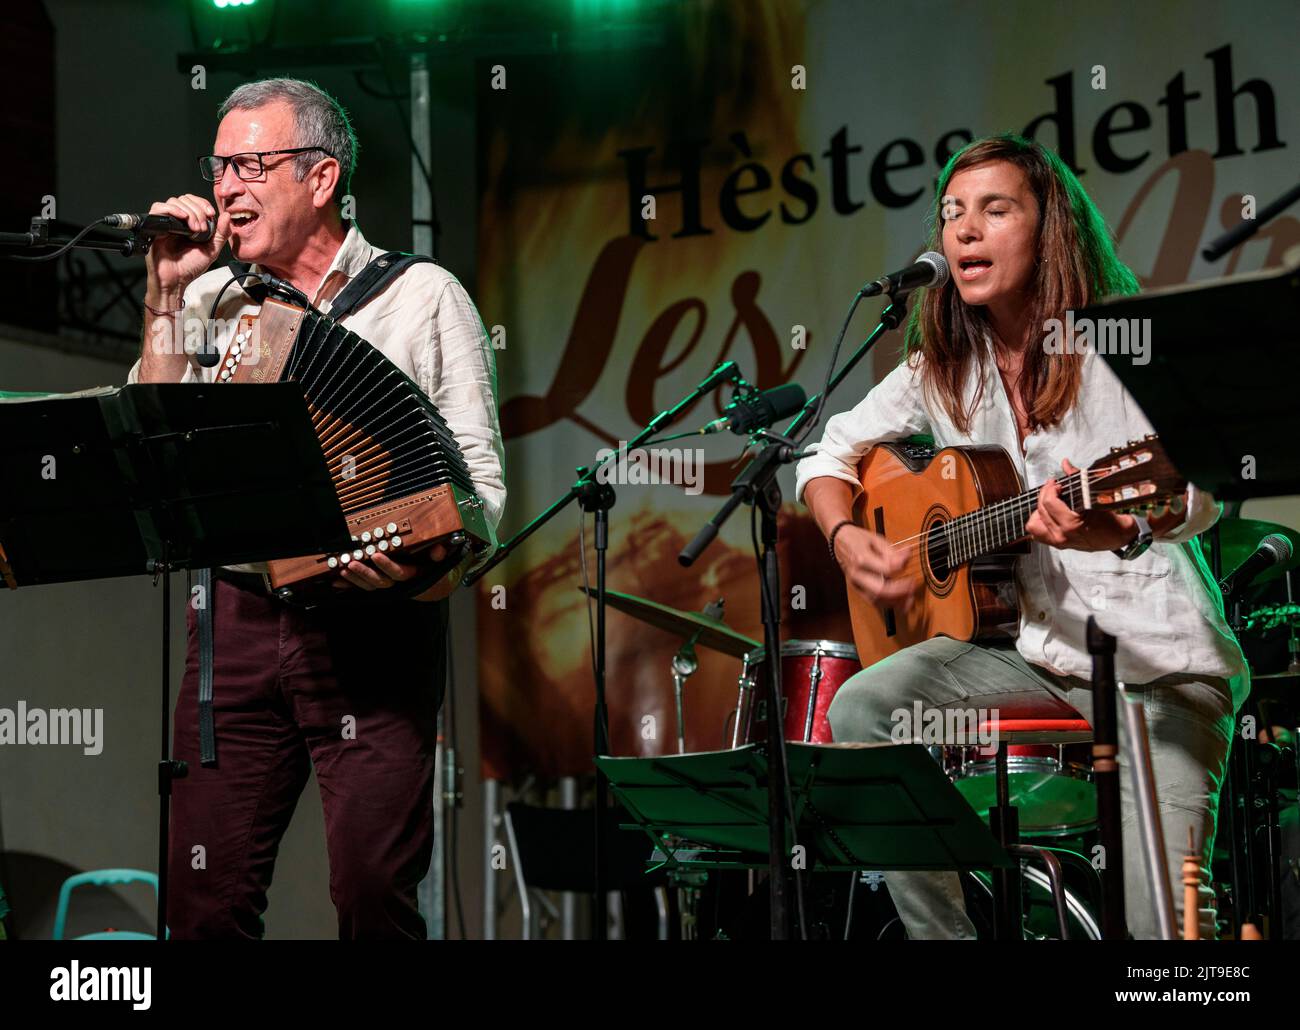 Concert by the Aranese group Sarabat, based on traditional Occitan folk music in Les (Aran Valley, Lleida, Catalonia, Spain) Stock Photo